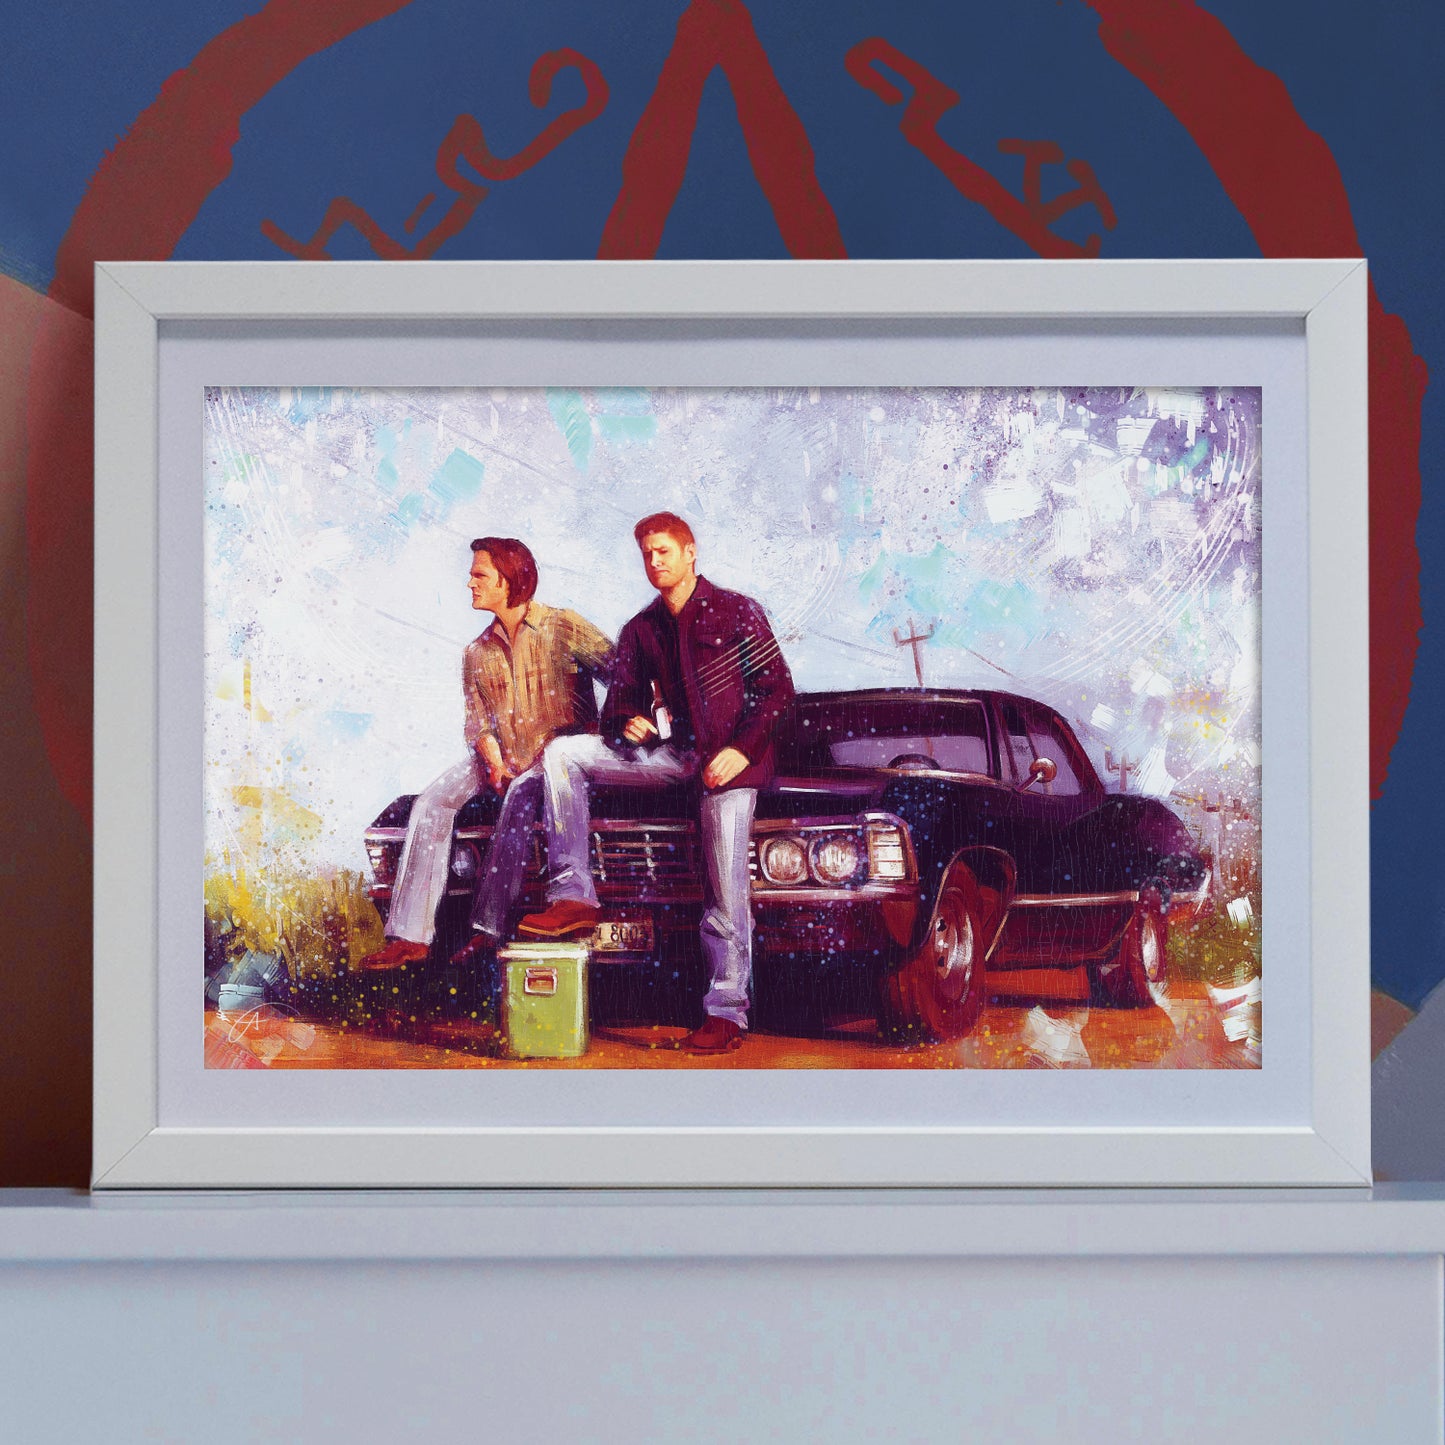 A picture in a white frame on a white shelf. The framed image shows Sam and Dean Winchester sitting on the hood of Baby, with a green cooler in front of the car. Behind the picture is a blue wall, with part of a Devil's Trap in red visible.